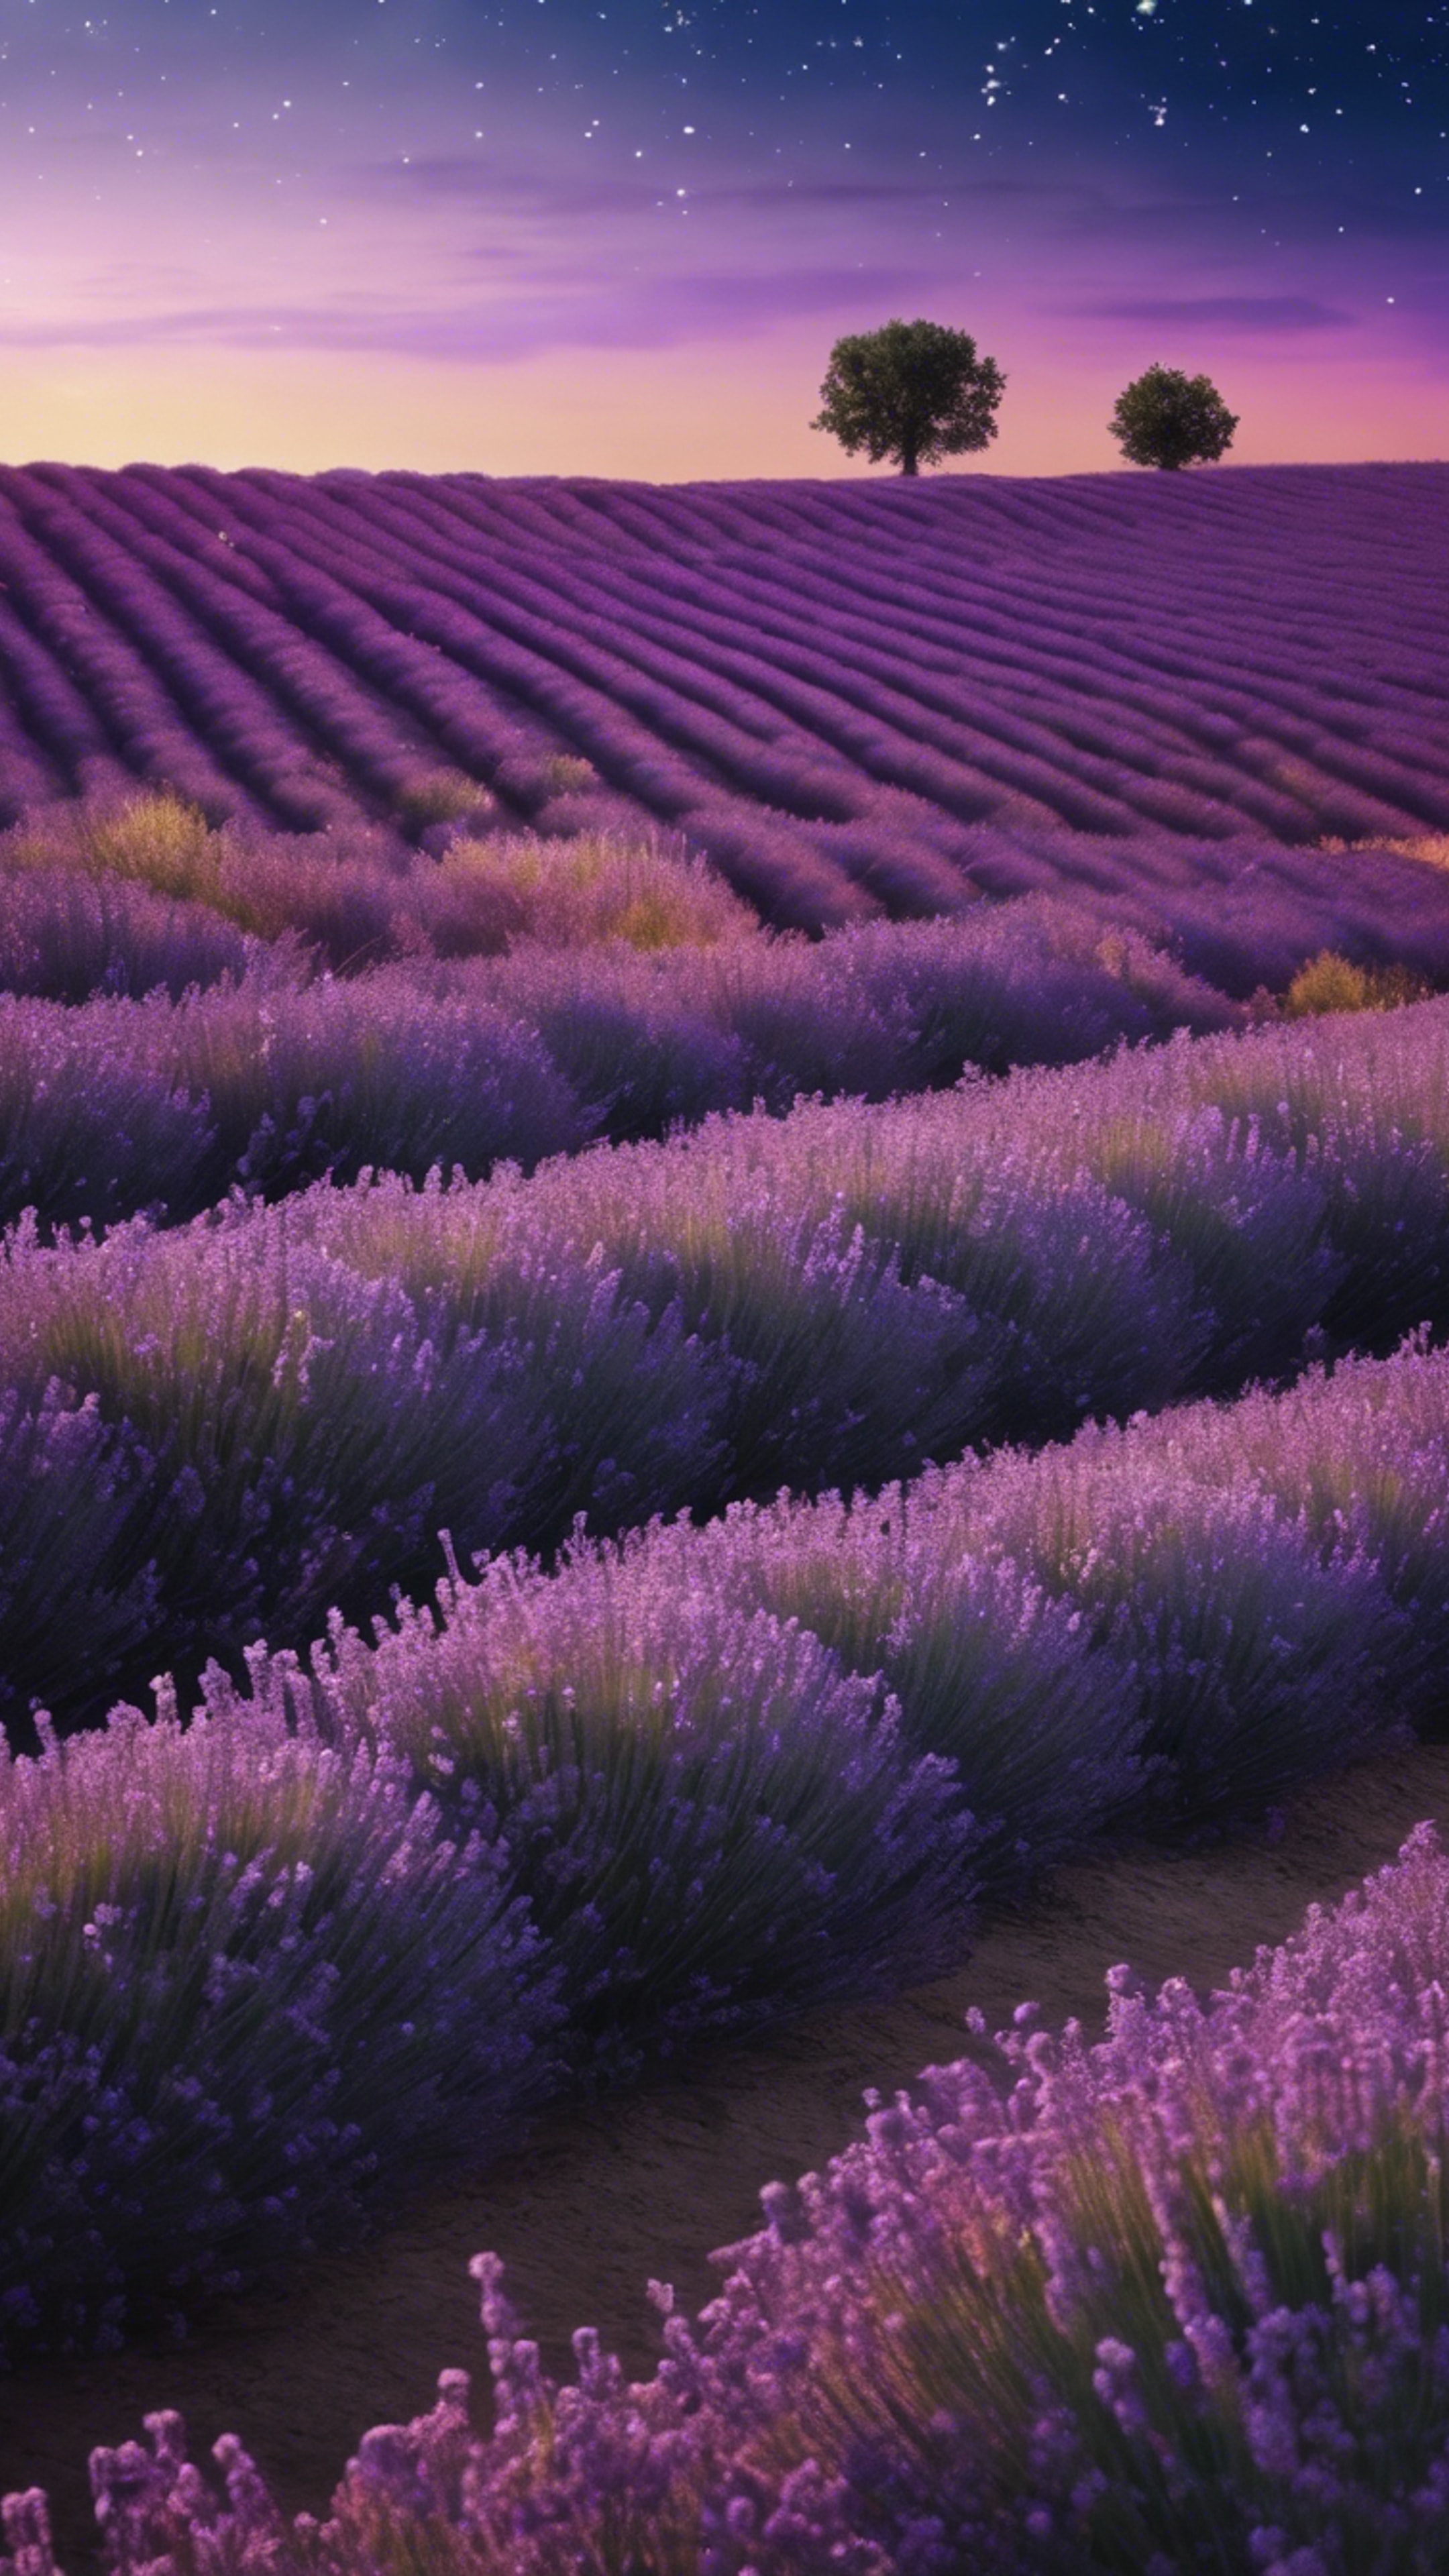 A lavender field under twilight, with stars beginning to light up in the sky.壁紙[d19e5dd9cee4494aa5f5]